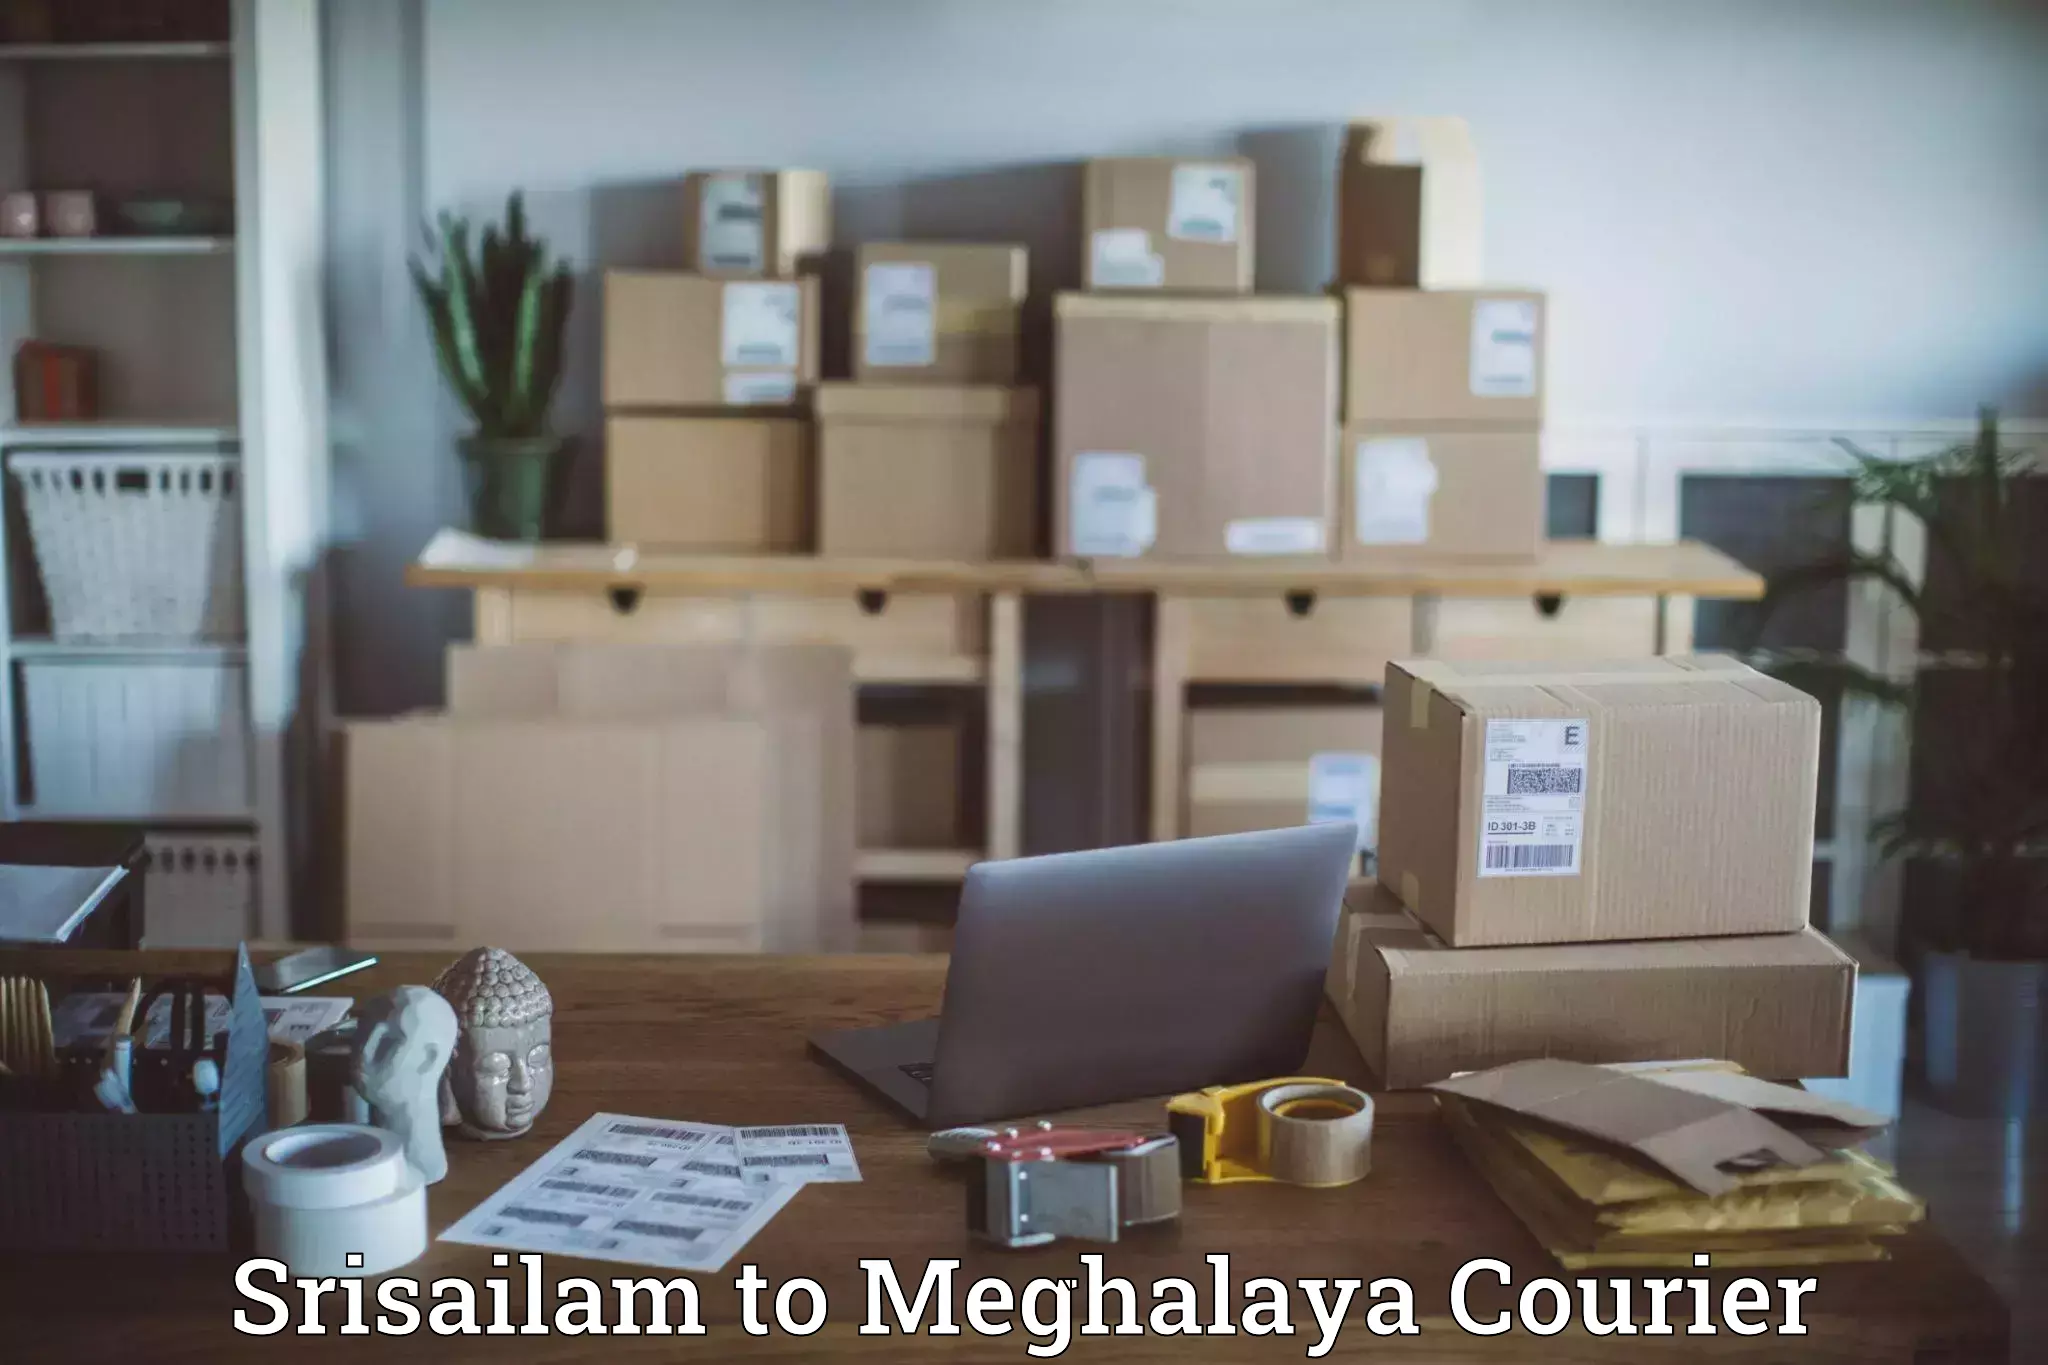 State-of-the-art courier technology Srisailam to Meghalaya